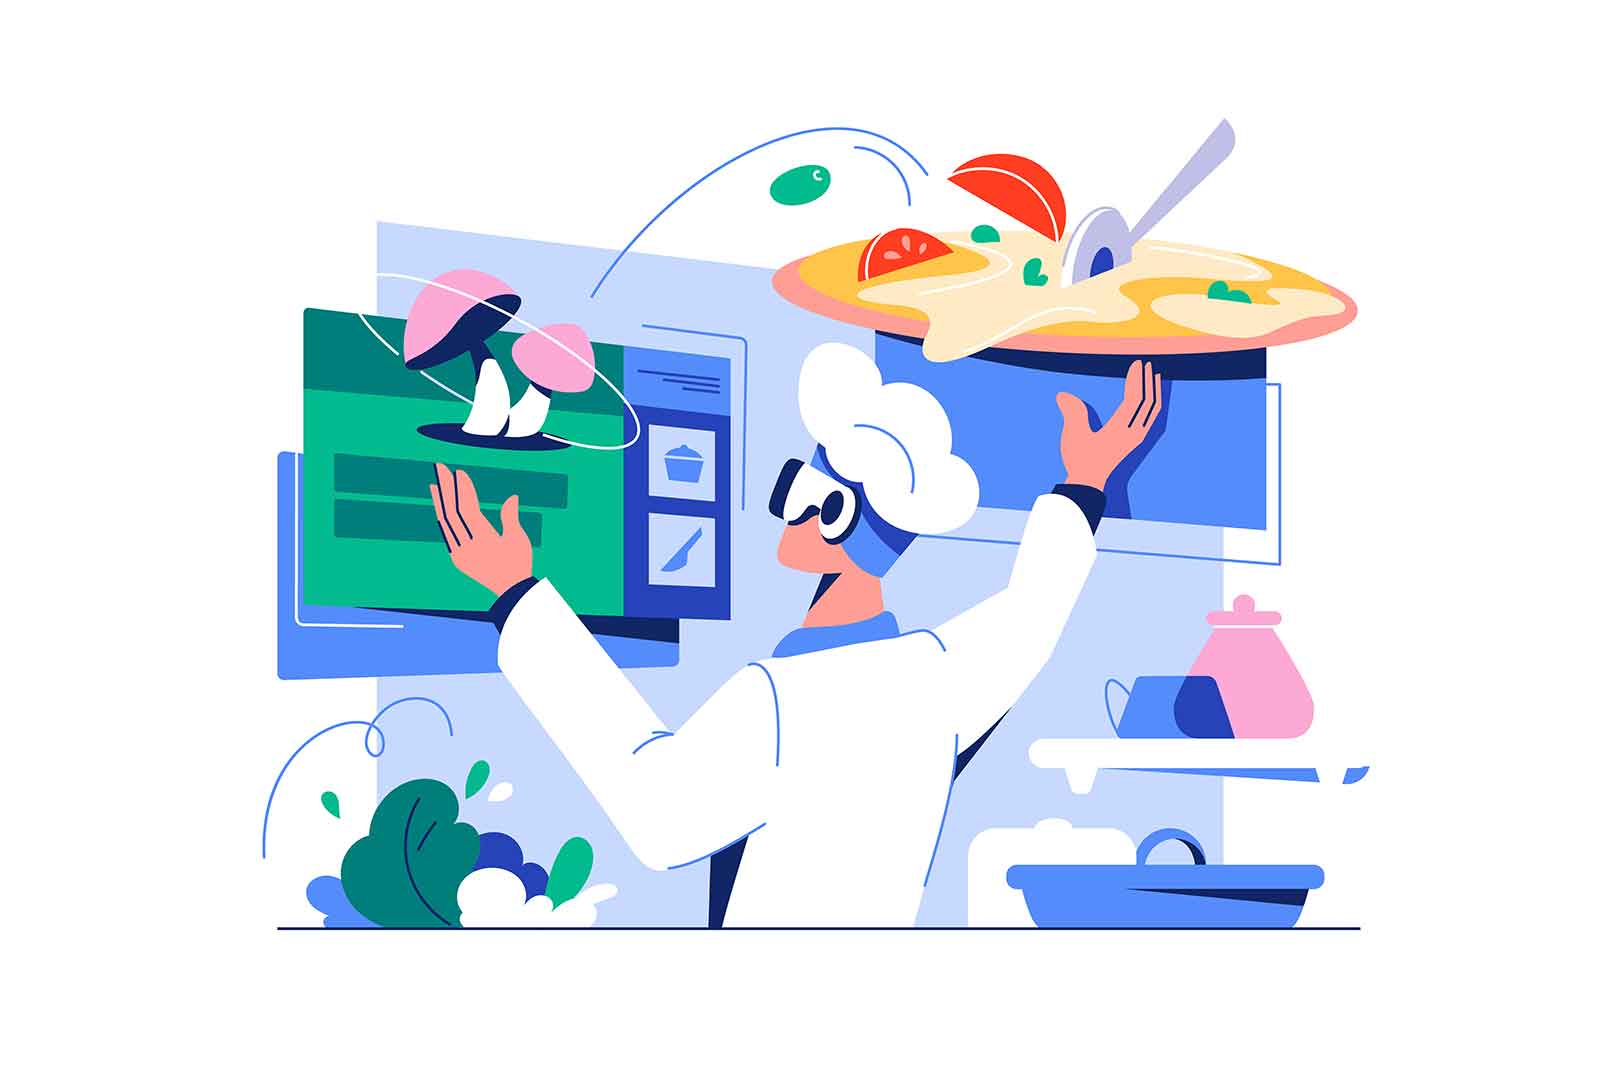 Сhef cooks pizza in virtual reality, vector illustration. Man use VR set in UI for cooking food.